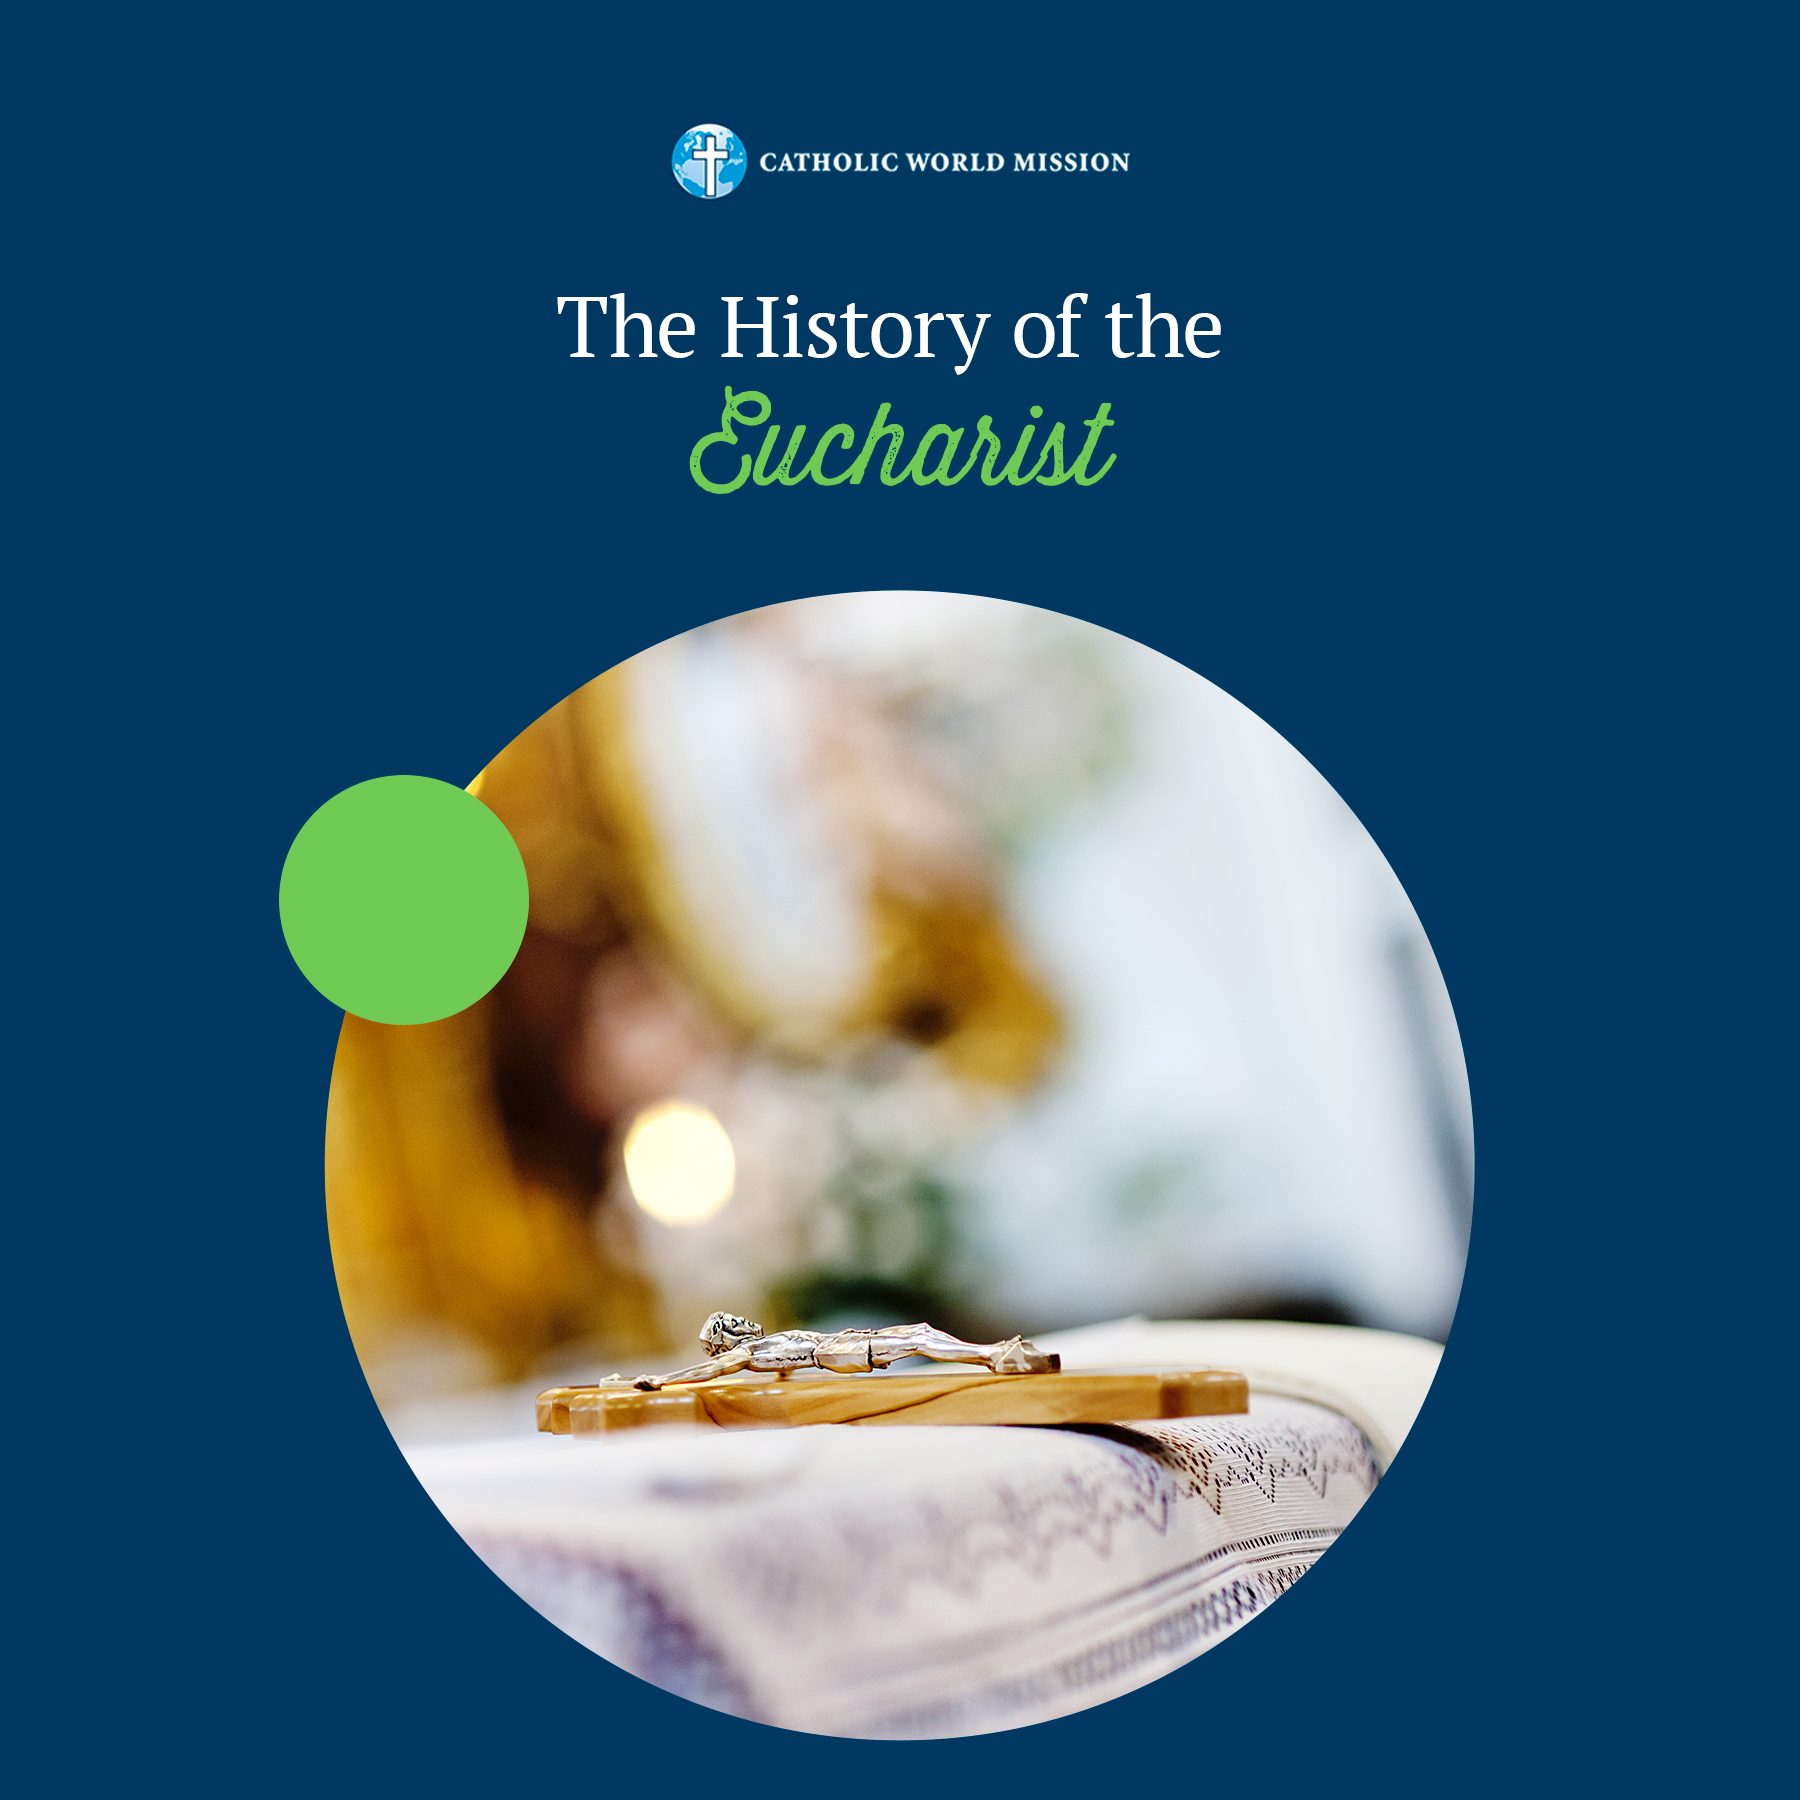 The History of the Eucharist